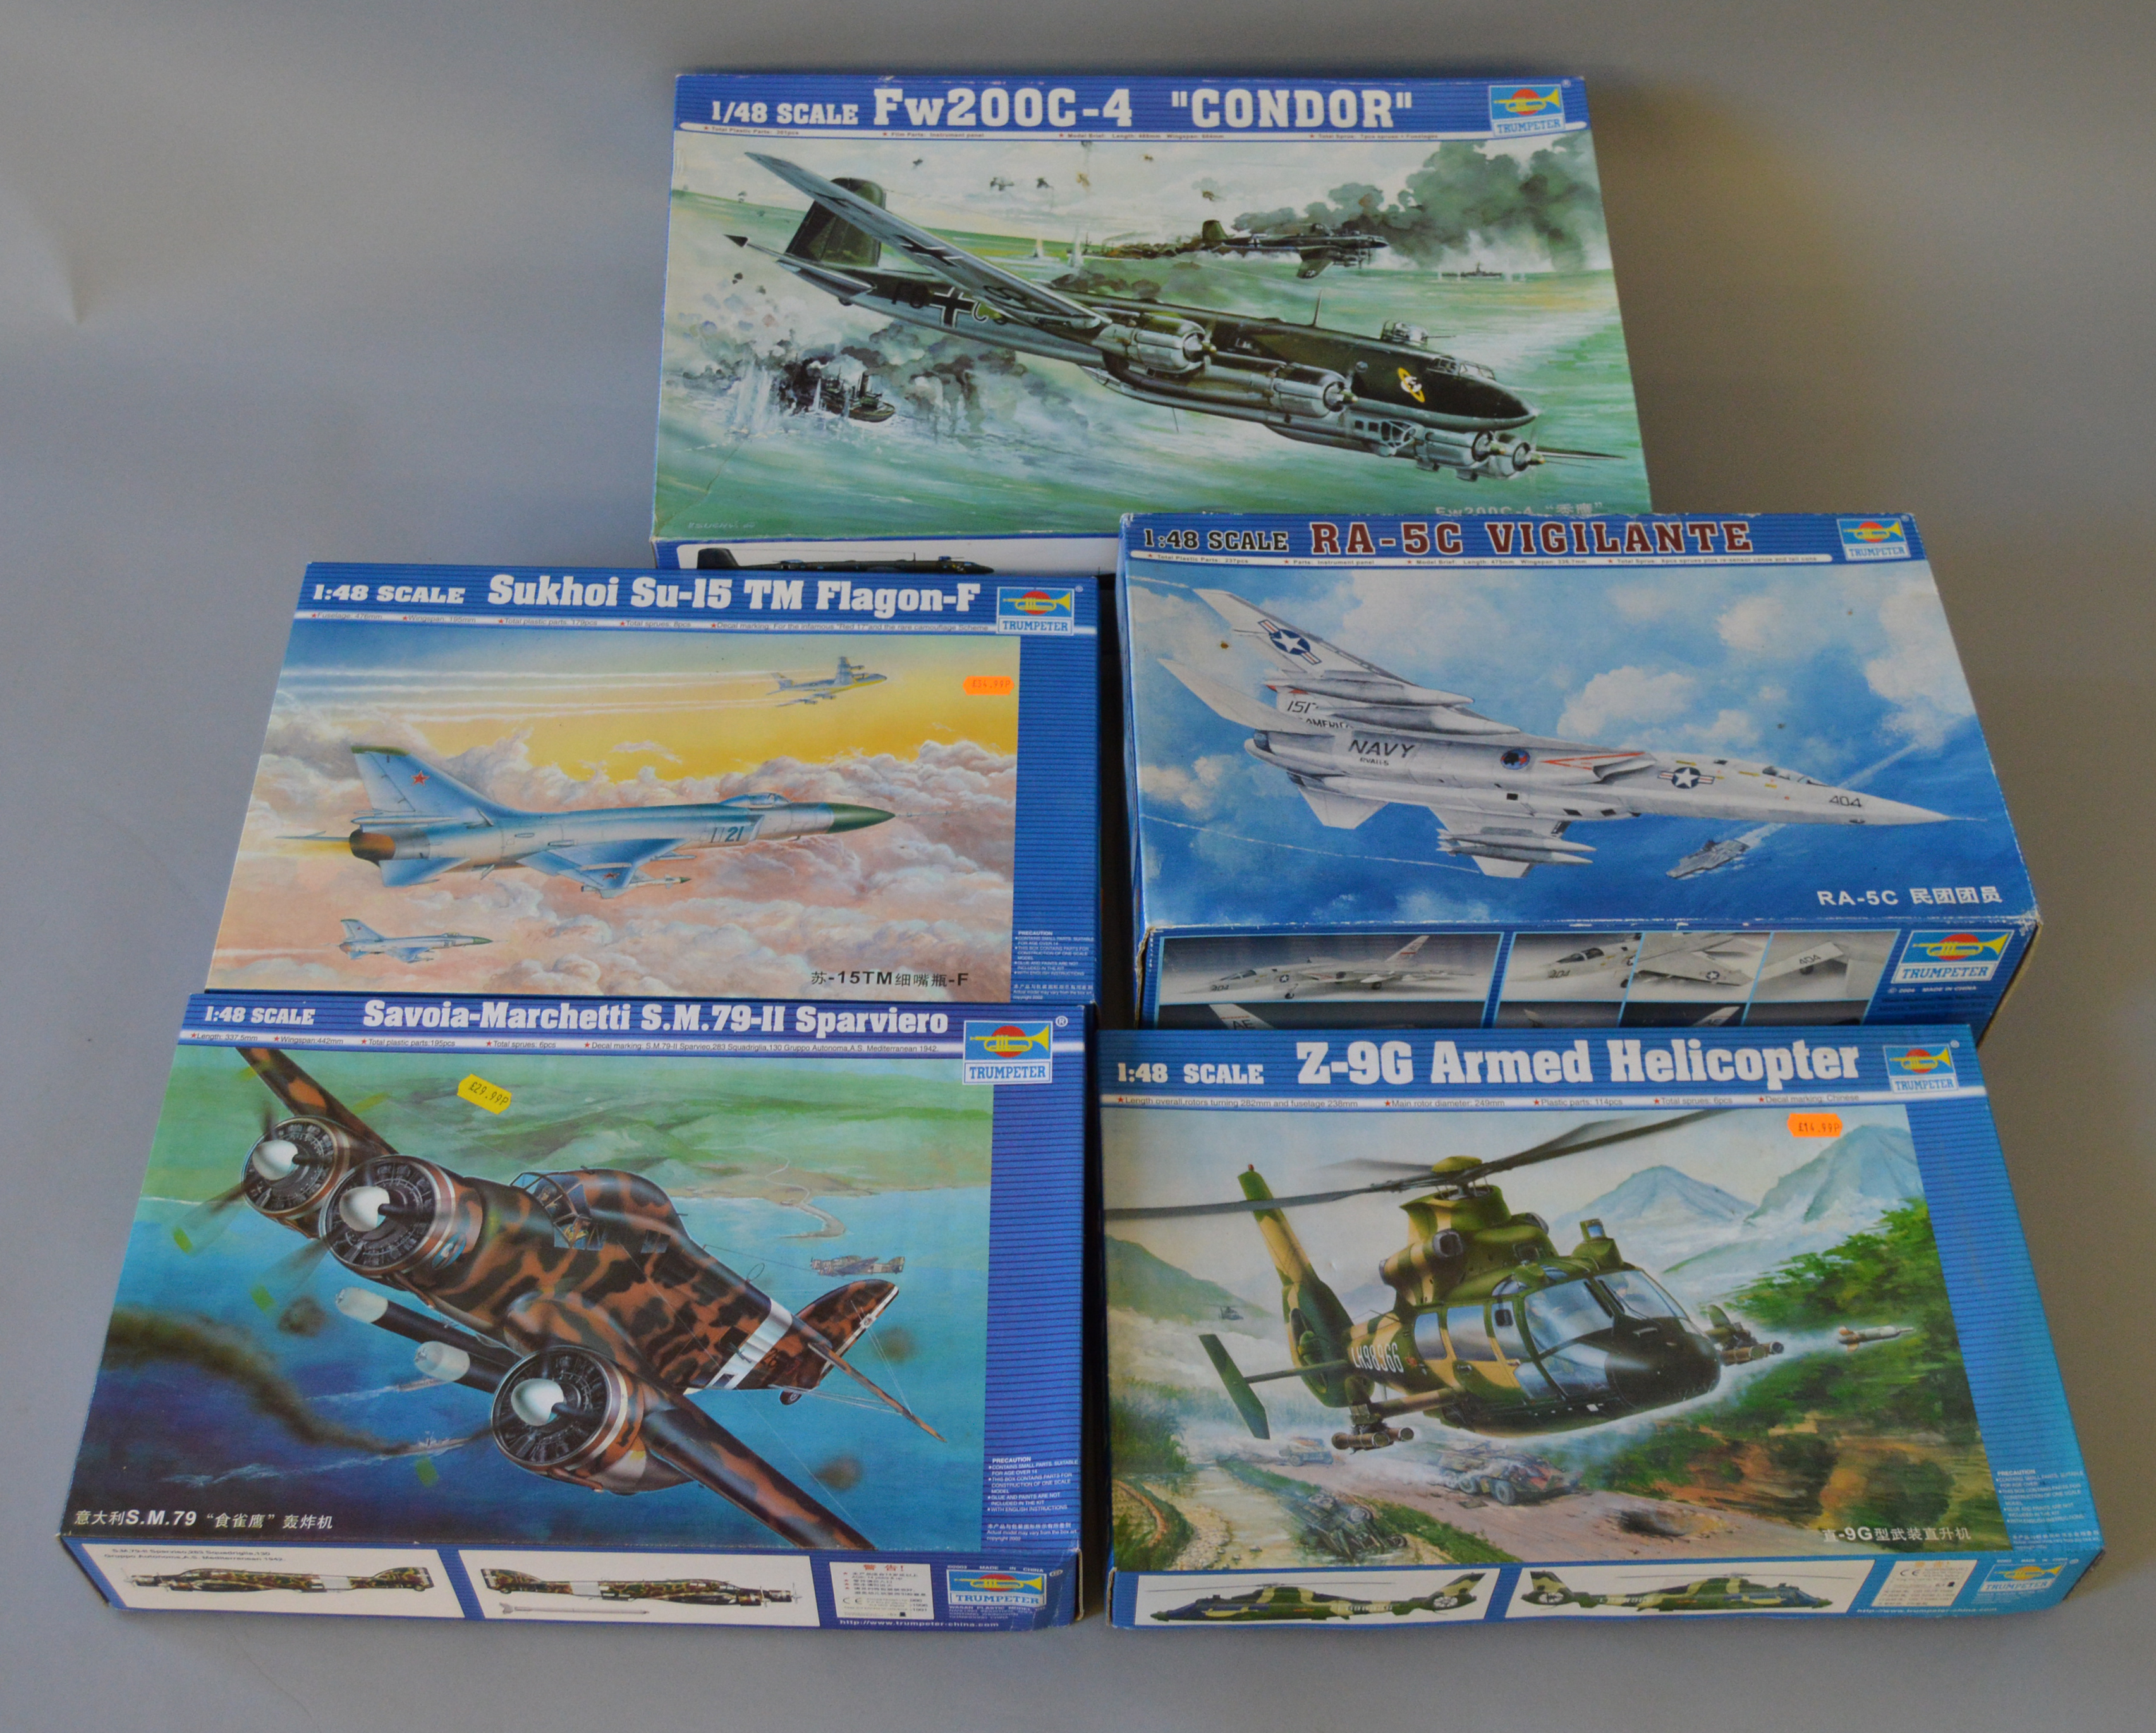 5 x Trumpeter 1:48 scale model aircraft kits. Viewing recommended.